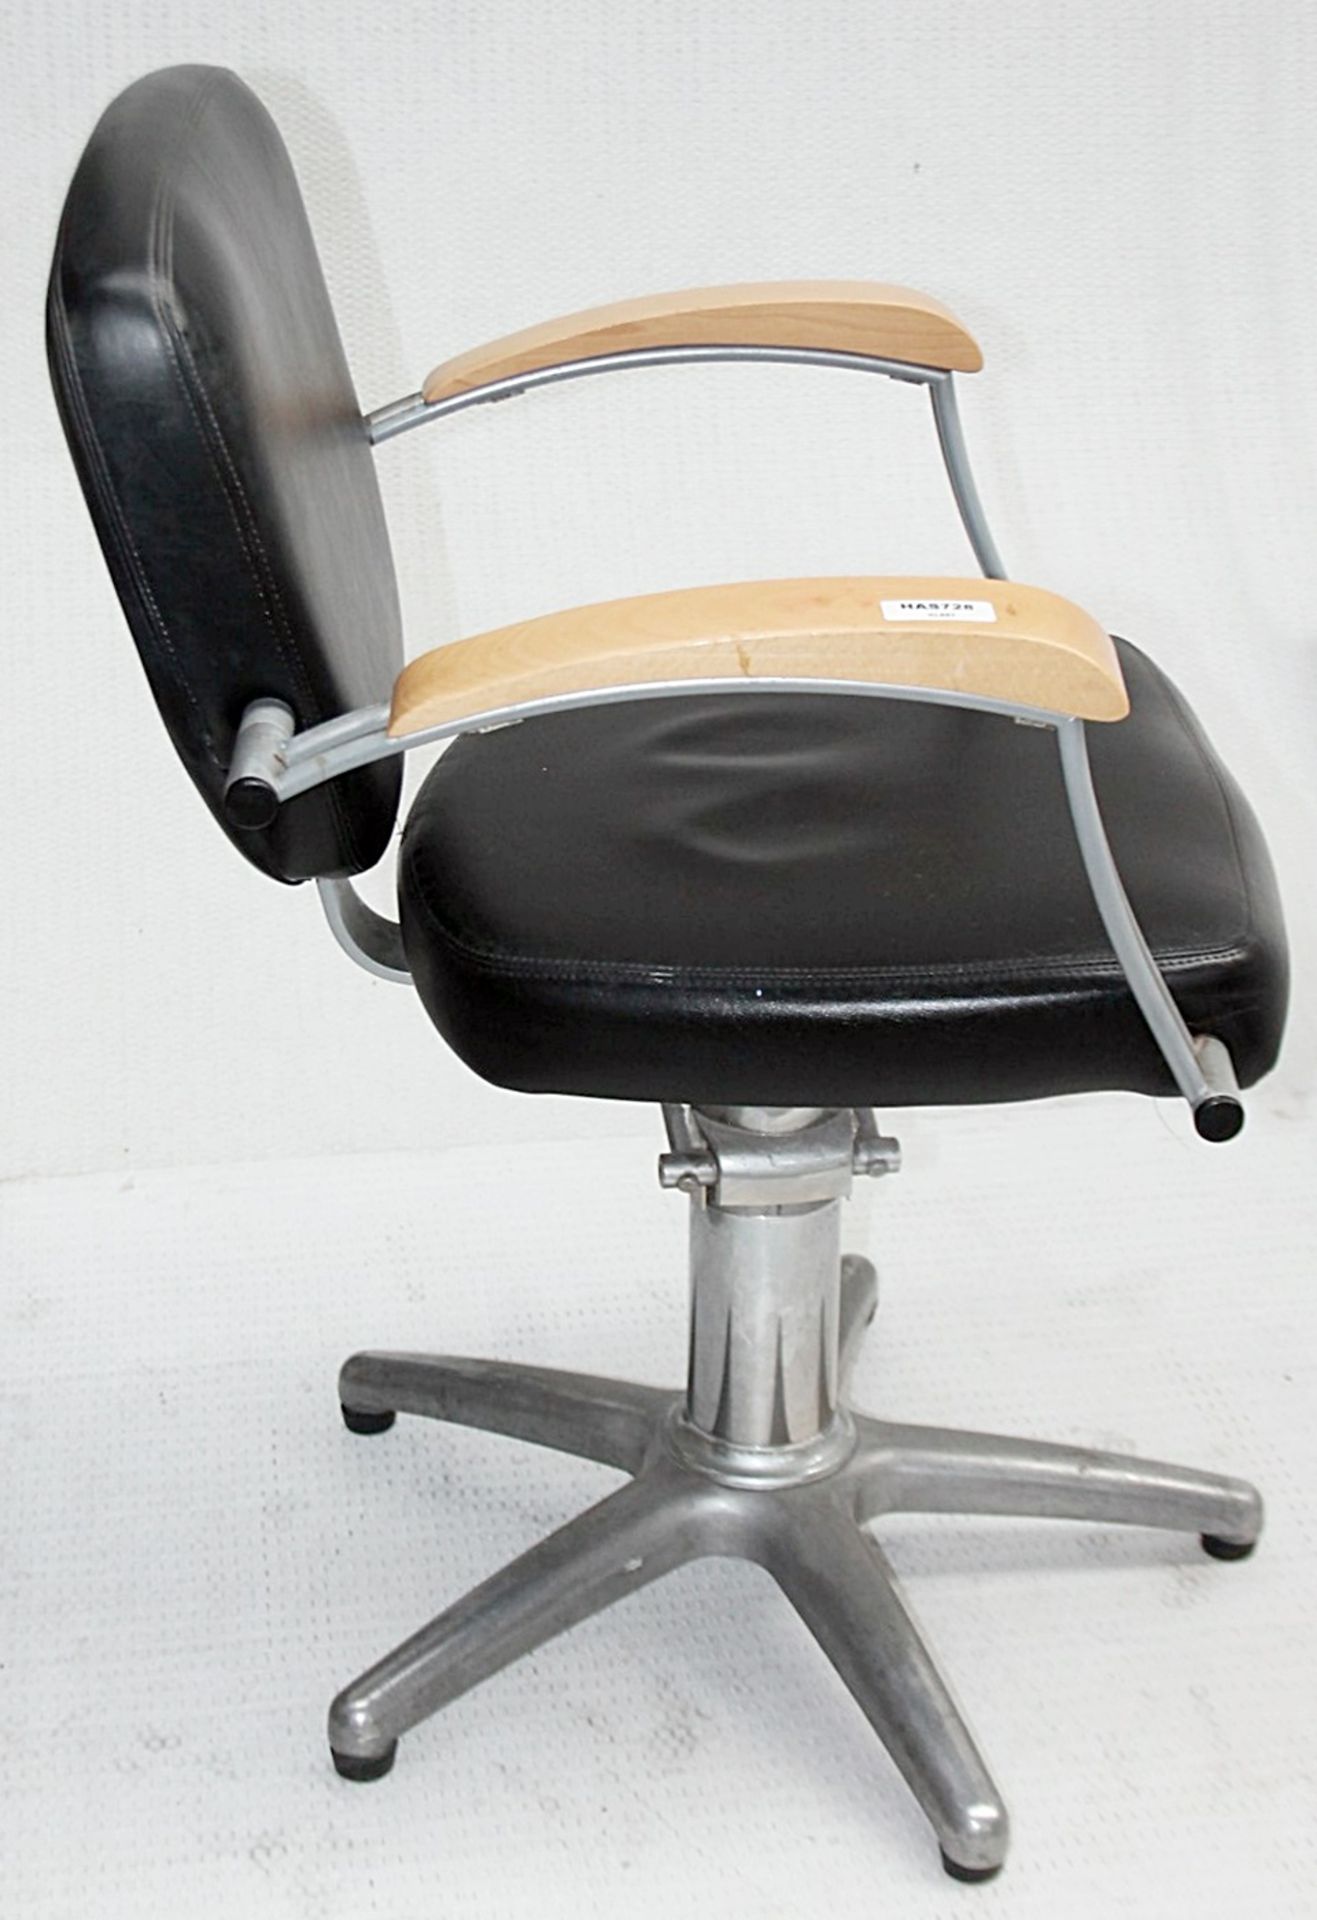 1 x Adjustable Black Hydraulic Barber Hairdressing Chair - Recently Removed From A Boutique Hair - Image 9 of 10